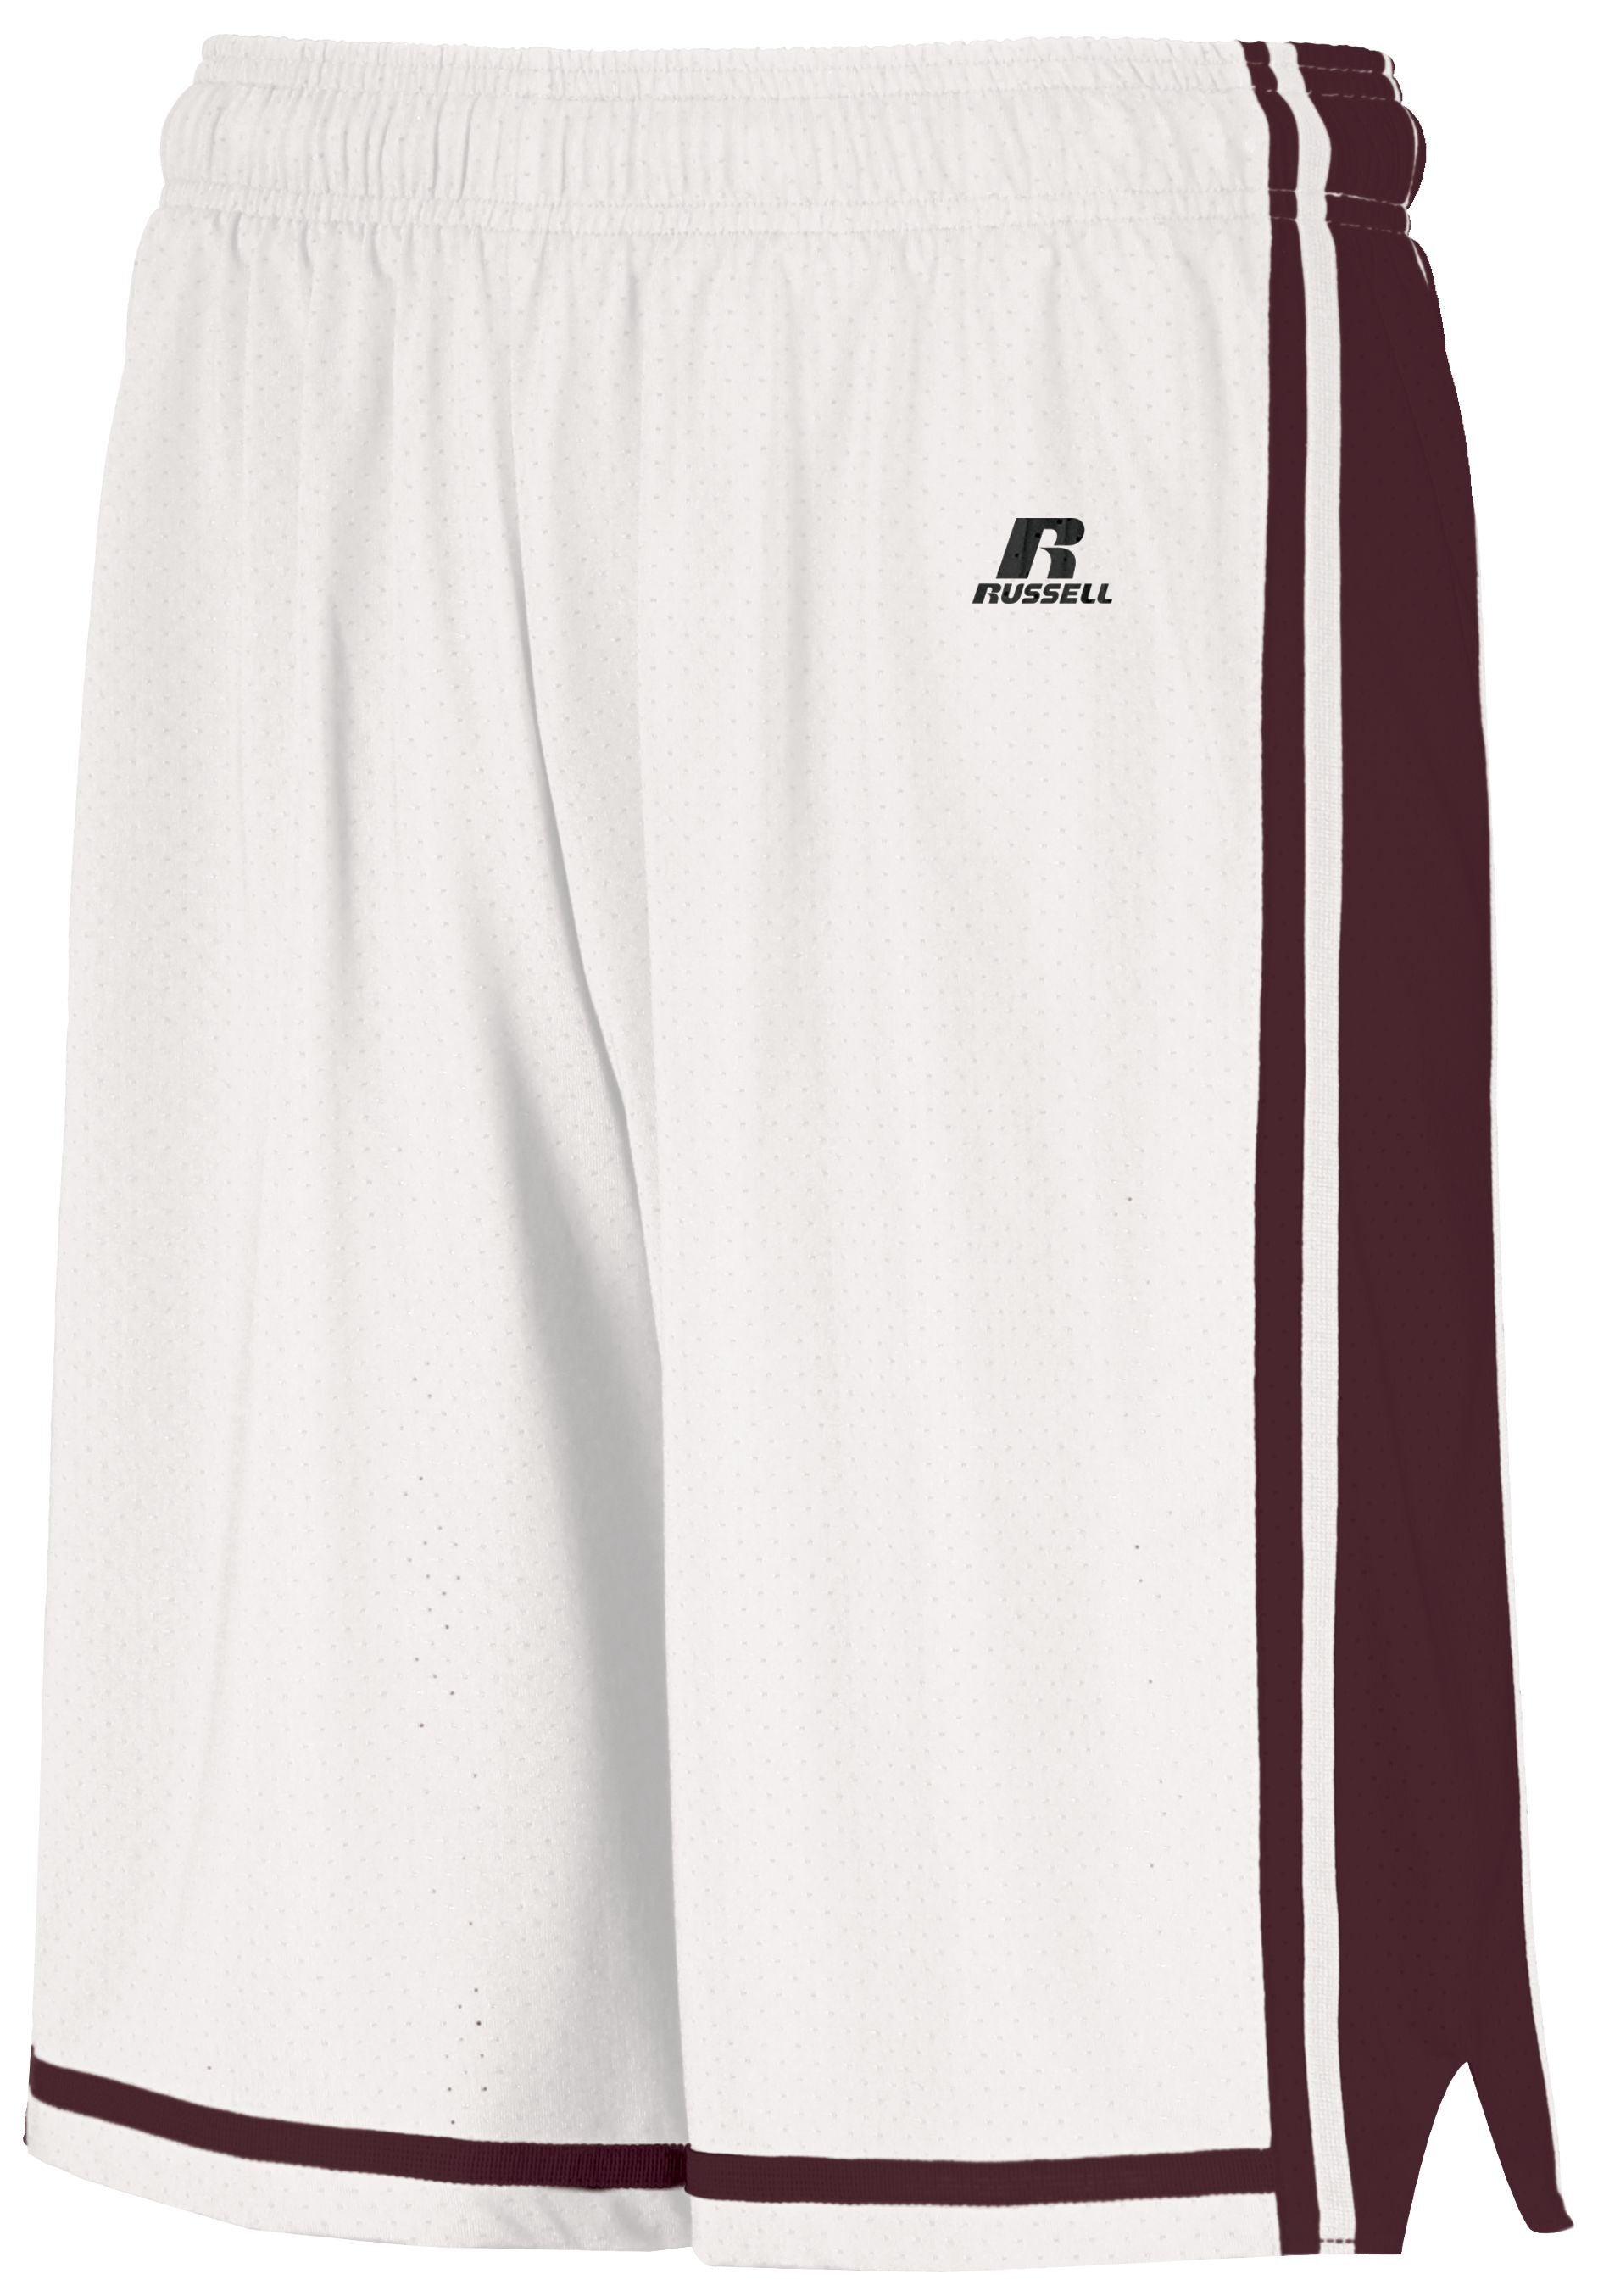 Russell Athletic Legacy Basketball Shorts in White/Maroon  -Part of the Adult, Adult-Shorts, Basketball, Russell-Athletic-Products, All-Sports, All-Sports-1 product lines at KanaleyCreations.com